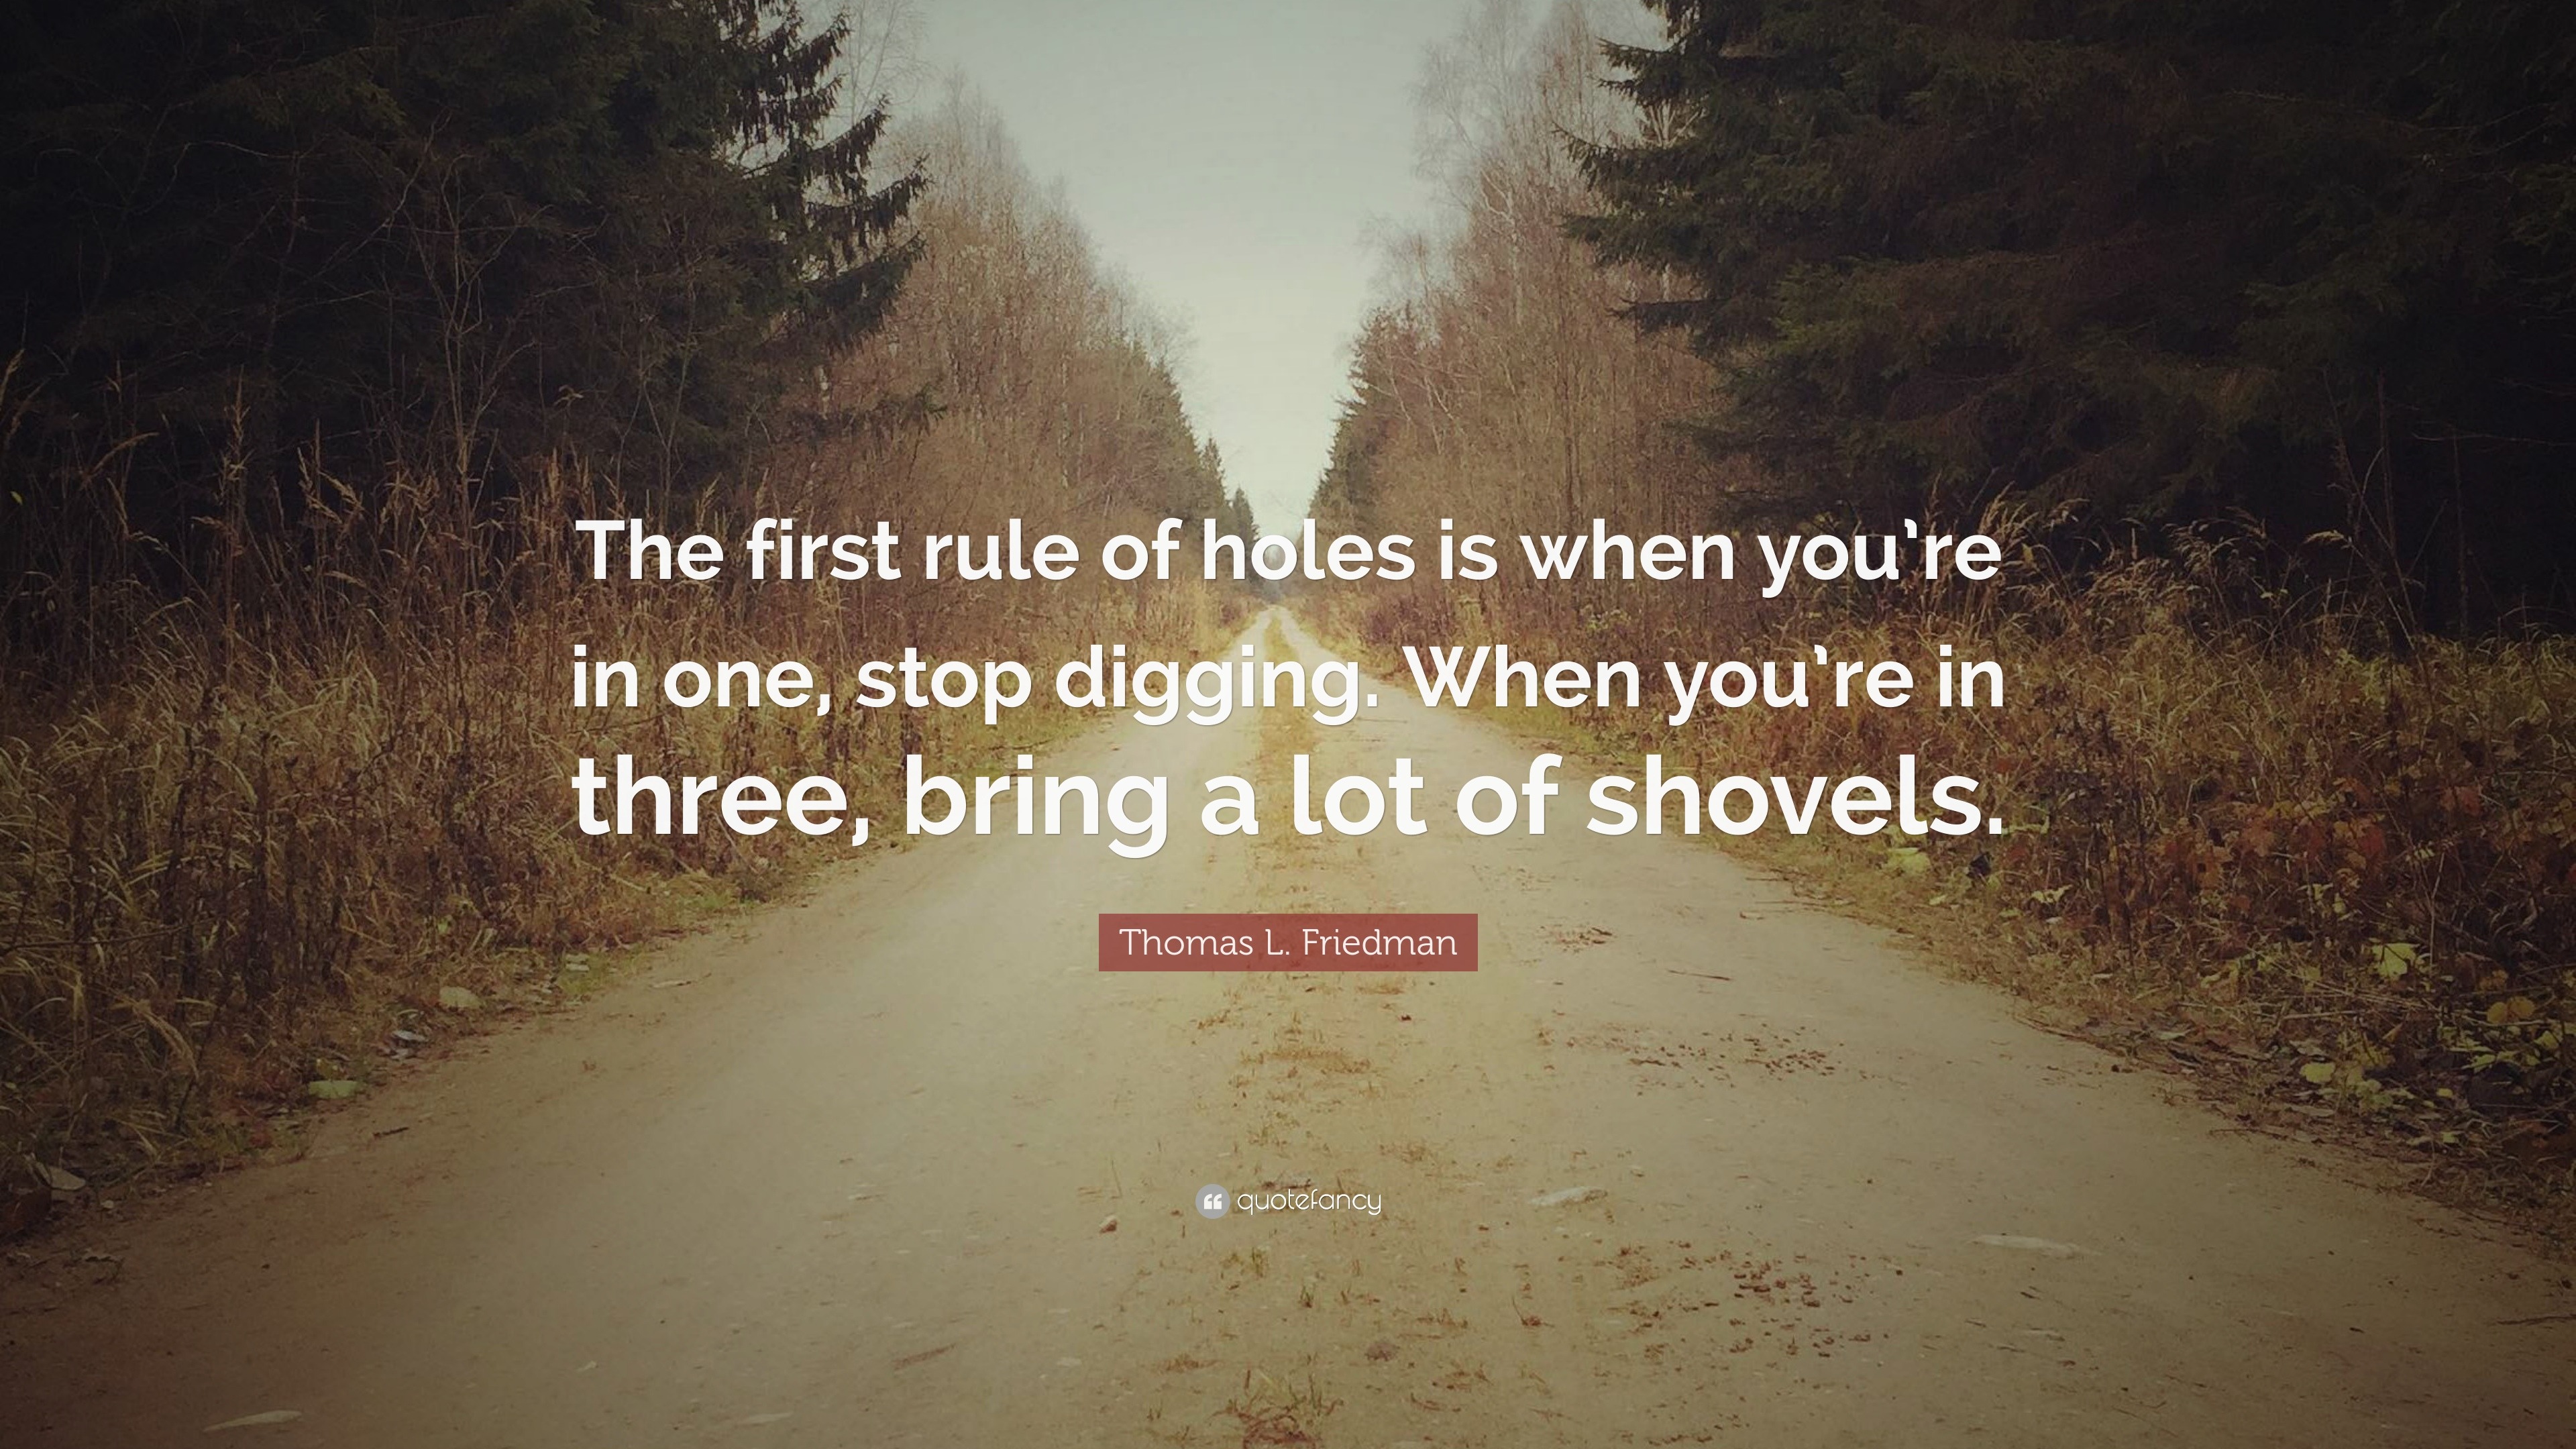 Thomas L. Friedman Quote: “The first rule of holes is when you’re in ...